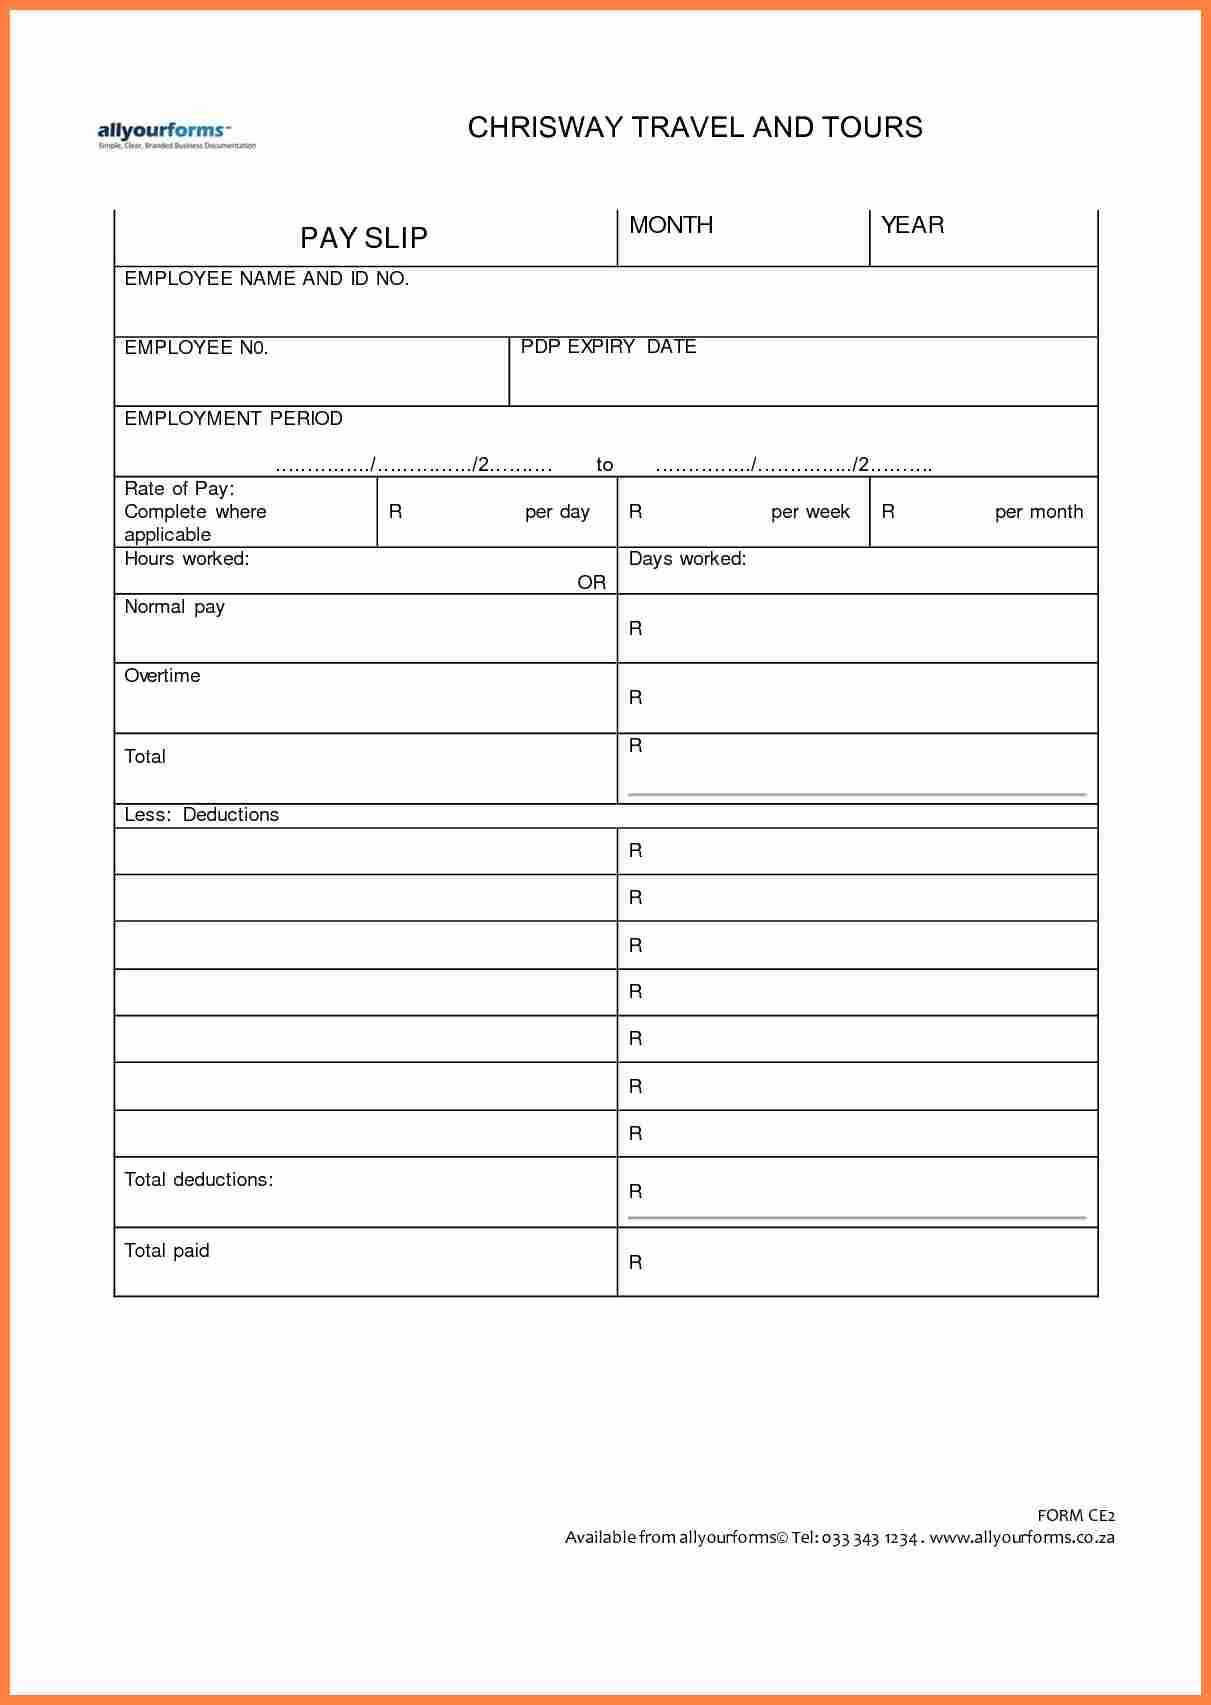 2F7D Payroll Payslip Template | Wiring Library Intended For Blank Payslip Template